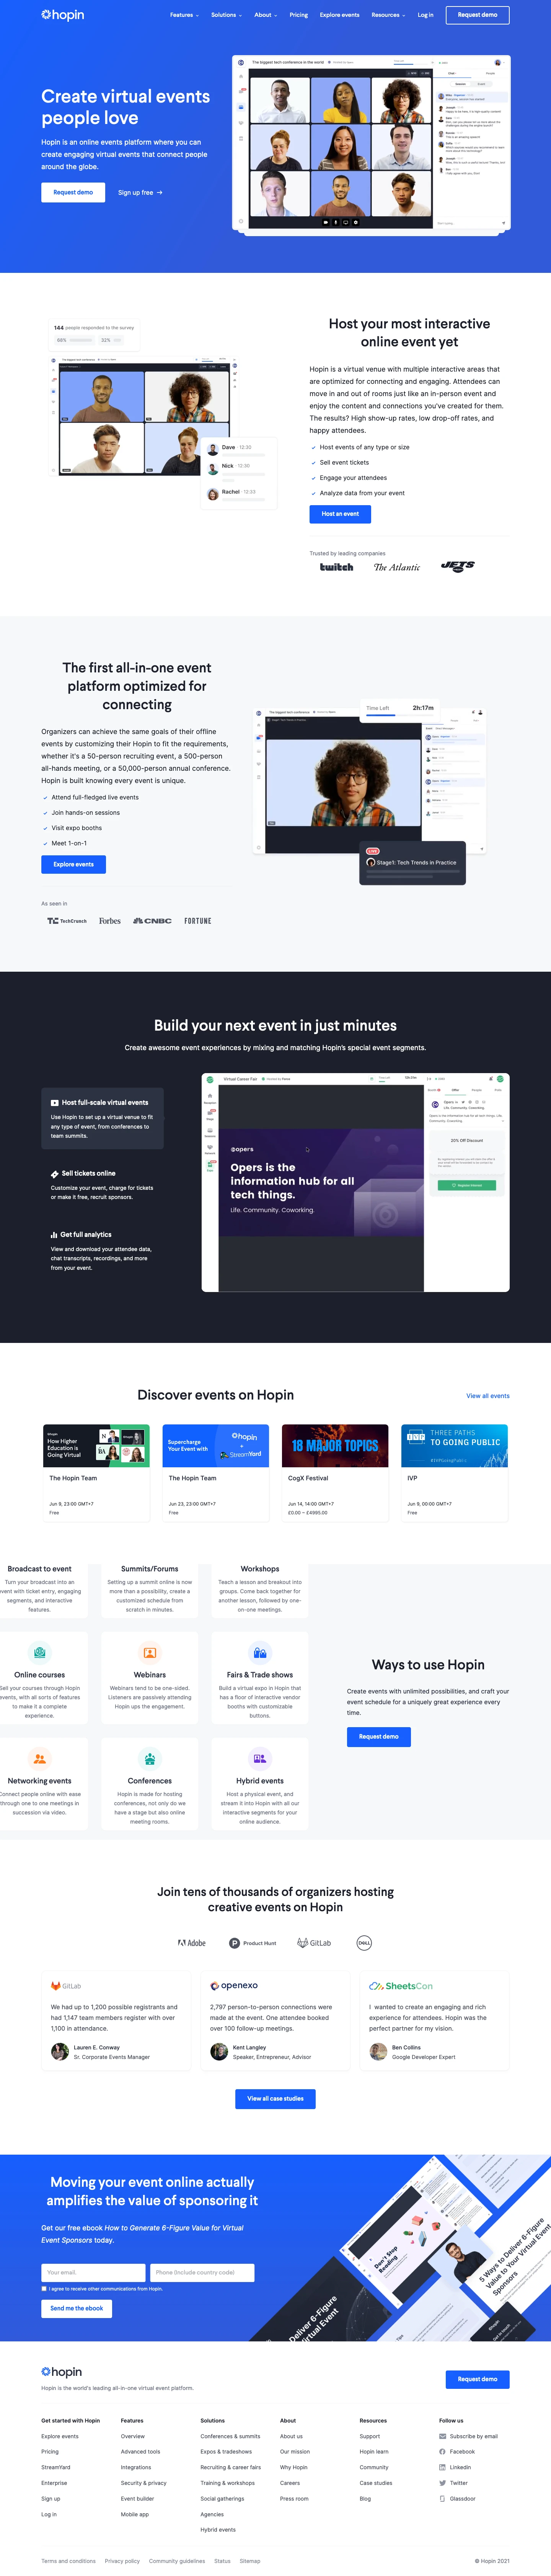 Hopin Landing Page Example: Create virtual events people love. Hopin is an online events platform where you can create engaging virtual events that connect people around the globe.